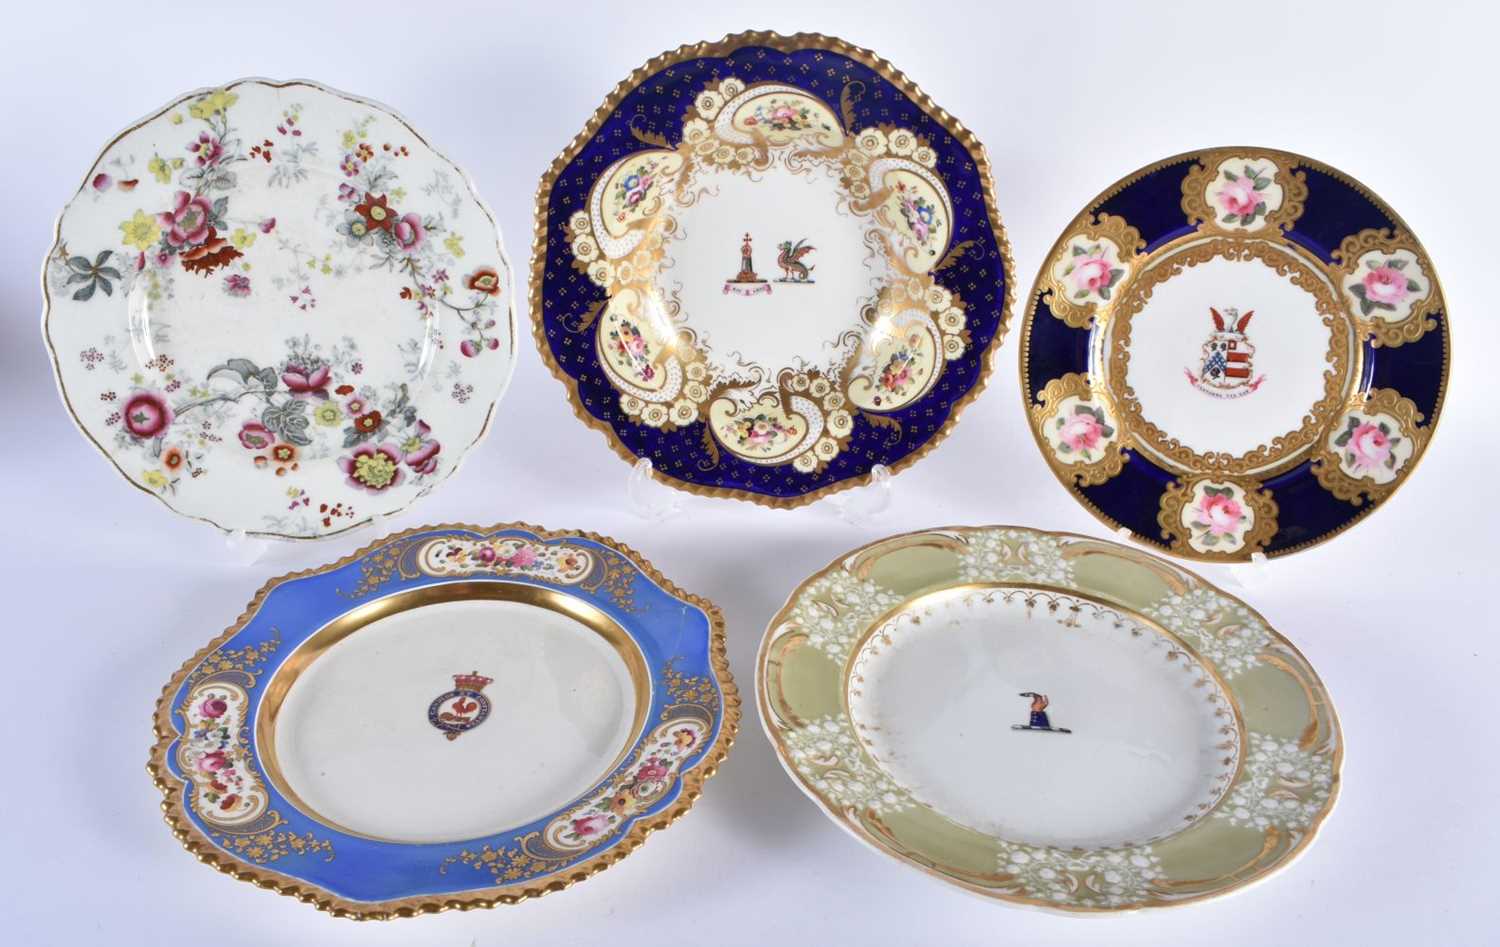 THREE EARLY 19TH CENTURY CHAMBERLAINS WORCESTER PORCELAIN PLATES together with two other